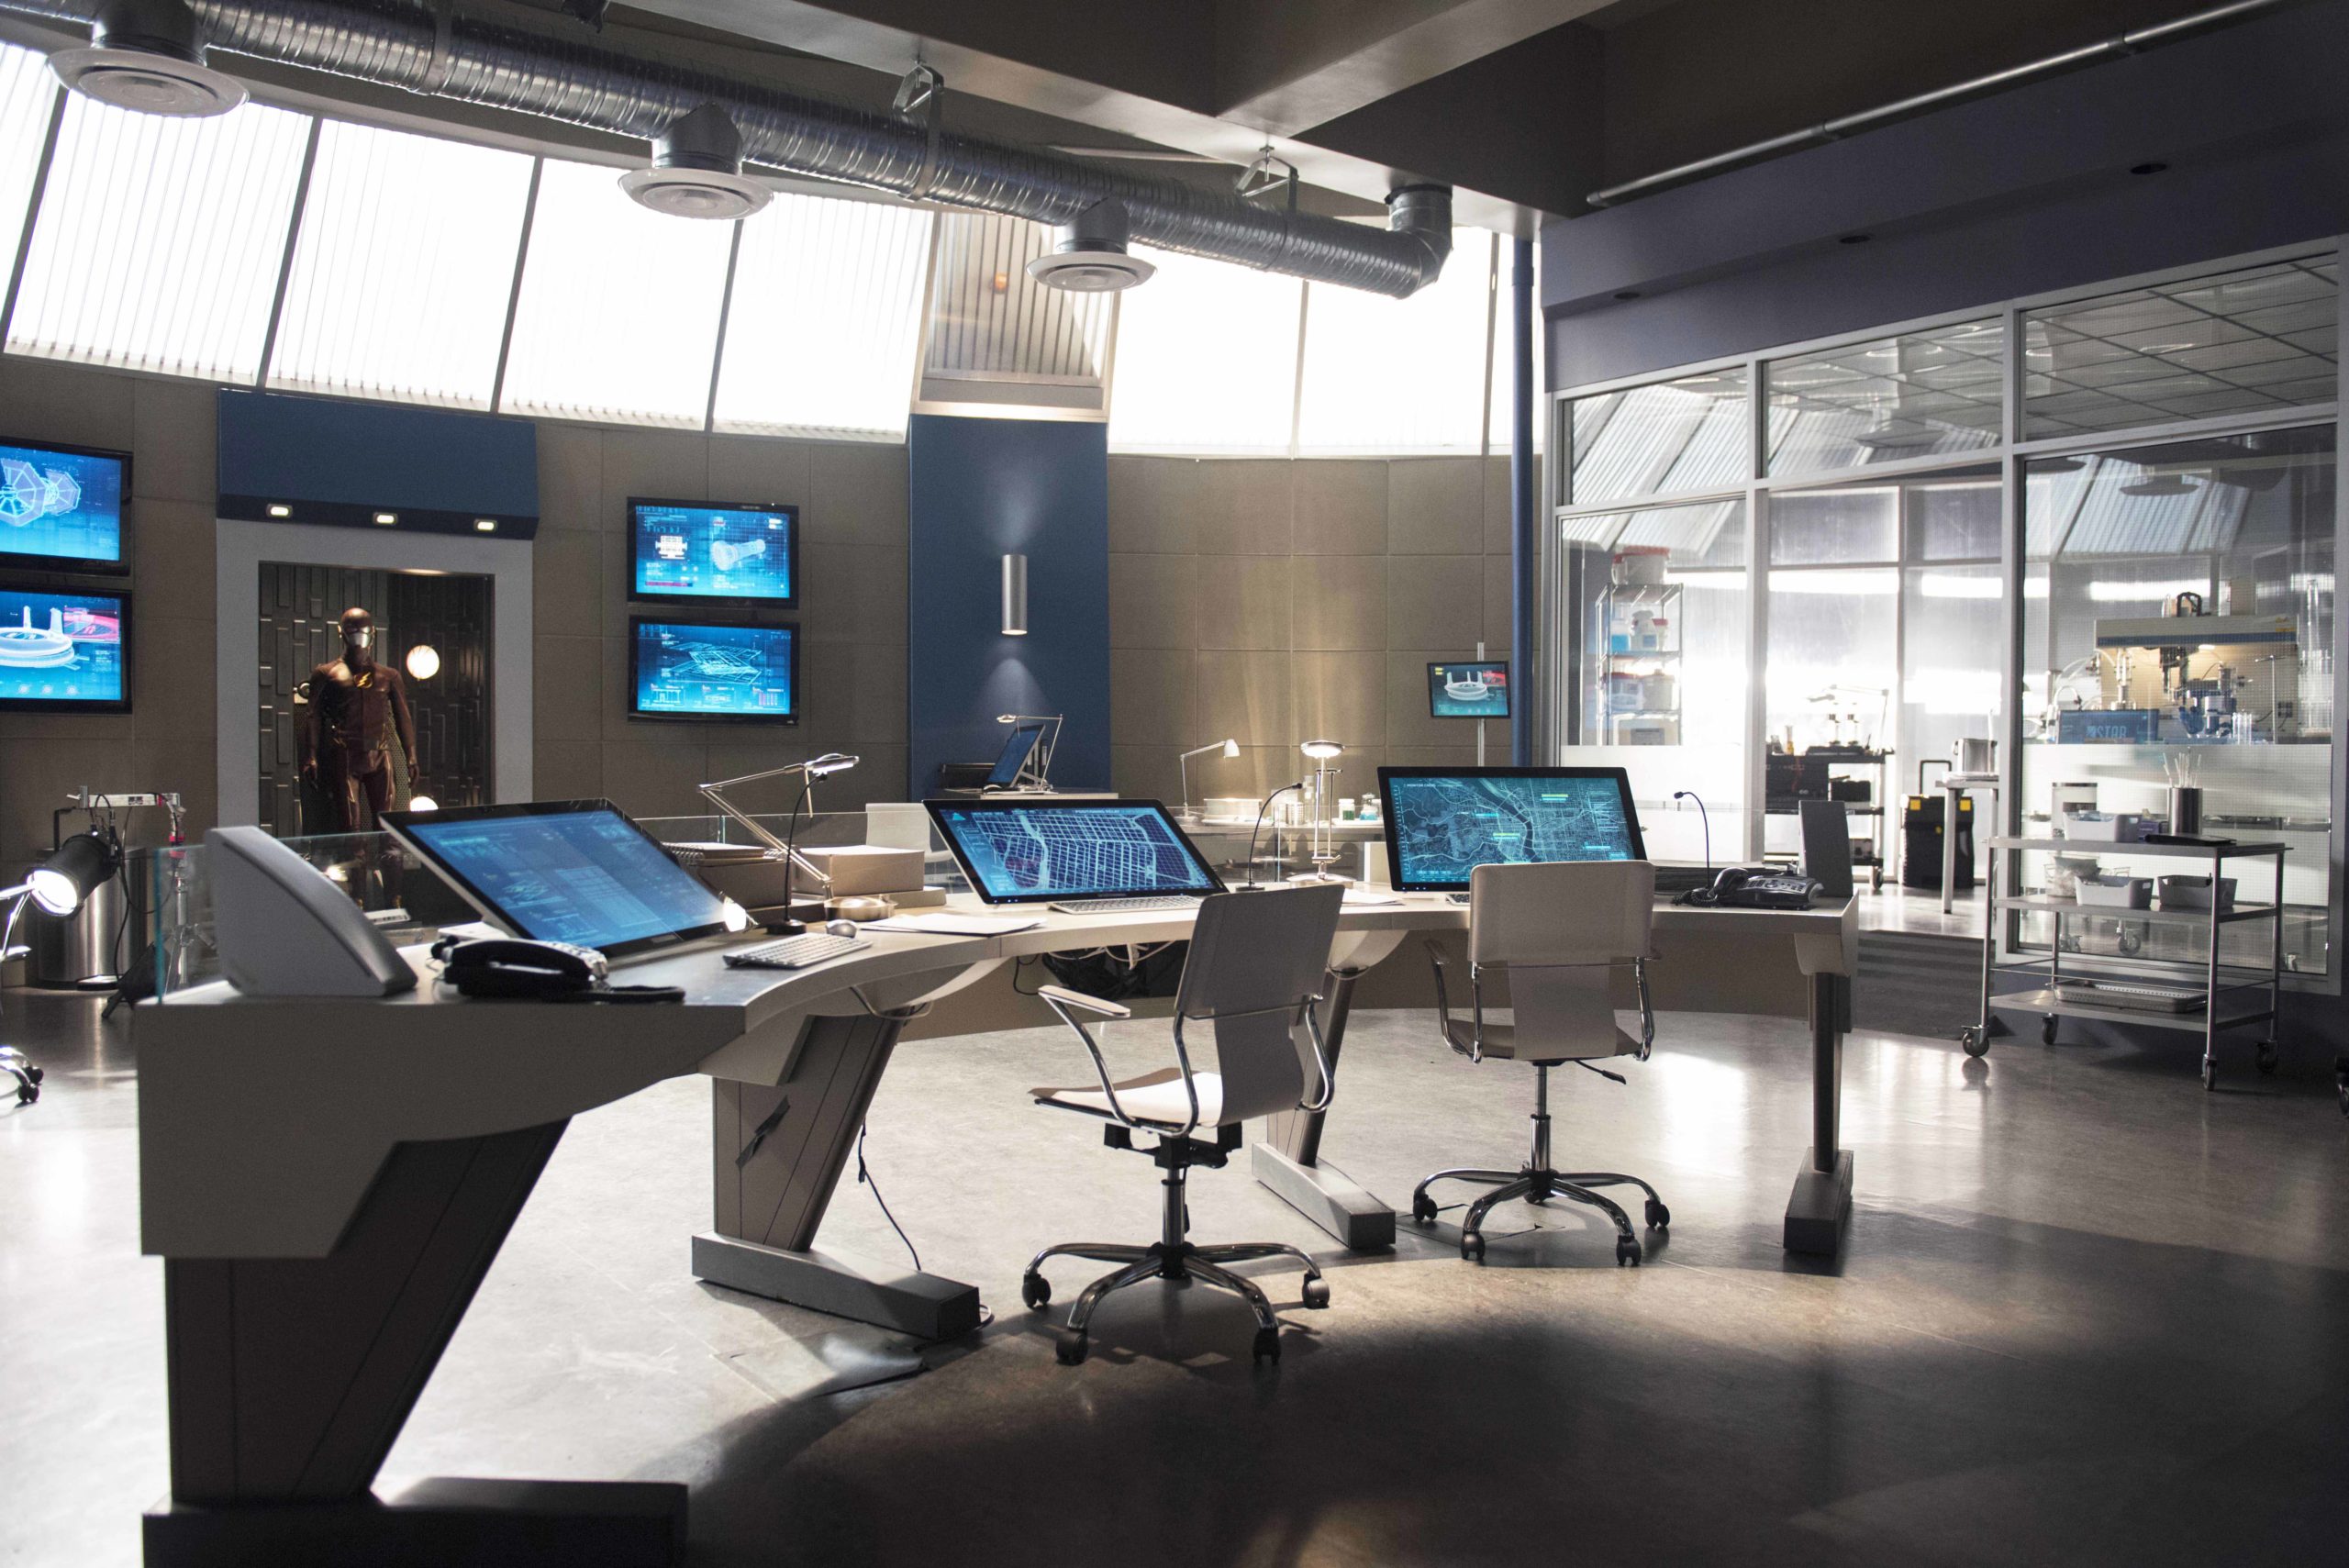 Step Into S.T.A.R. Labs and the Cortex From 'The Flash' (PHOTOS)